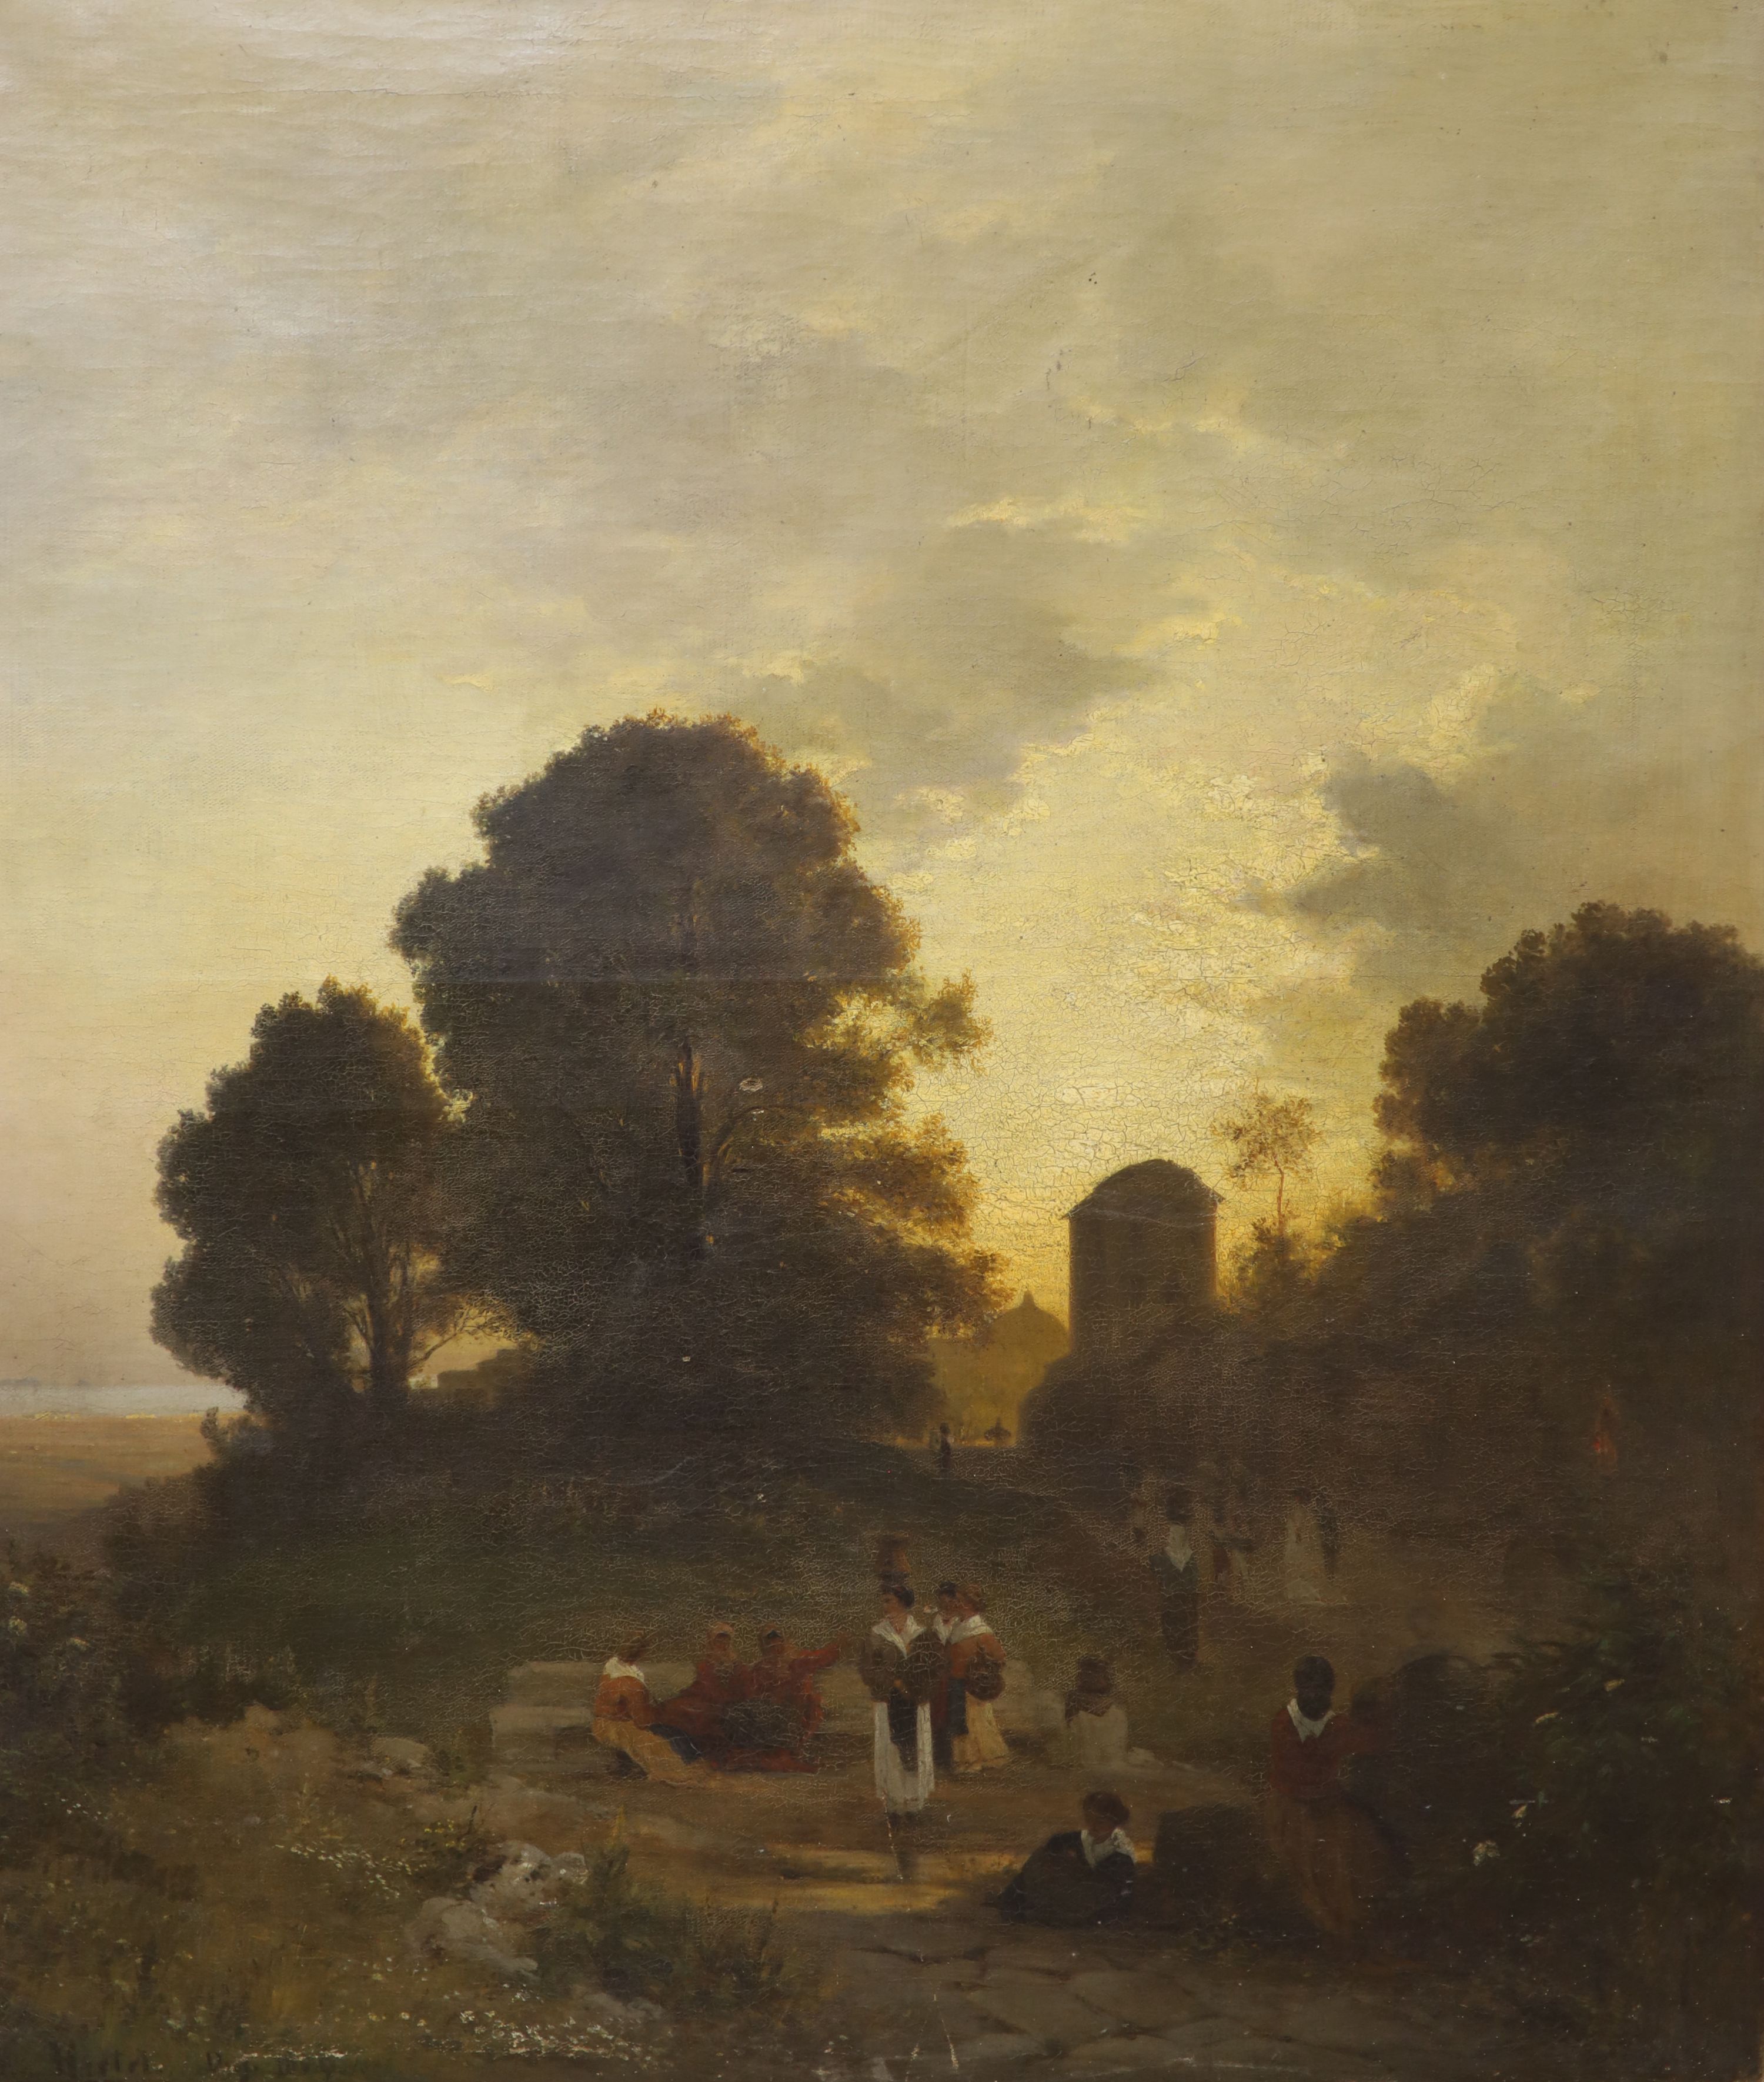 French School, 1864, oil on canvas, Water carriers at sunset, indistinctly signed Hertel? and dated 1864, 110 x 96cm, unframed